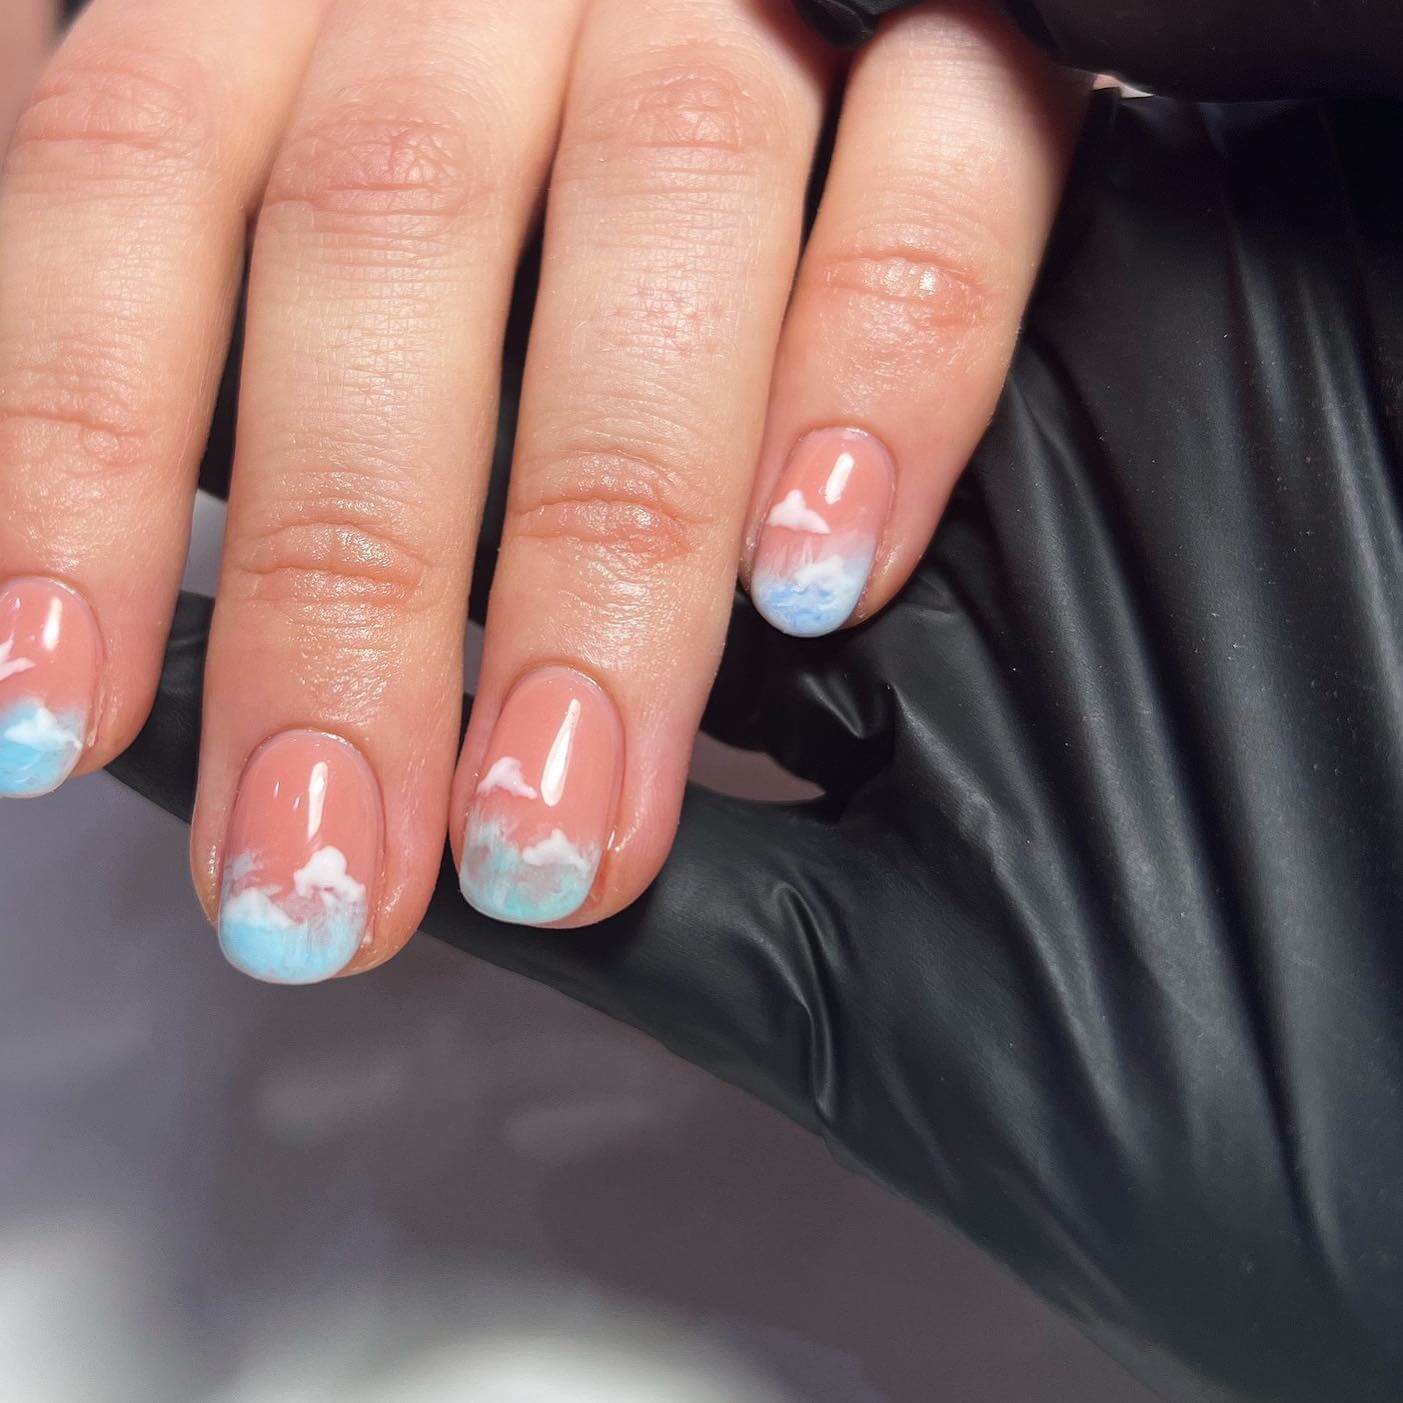 Baby Blue Nail Designs with Clouds